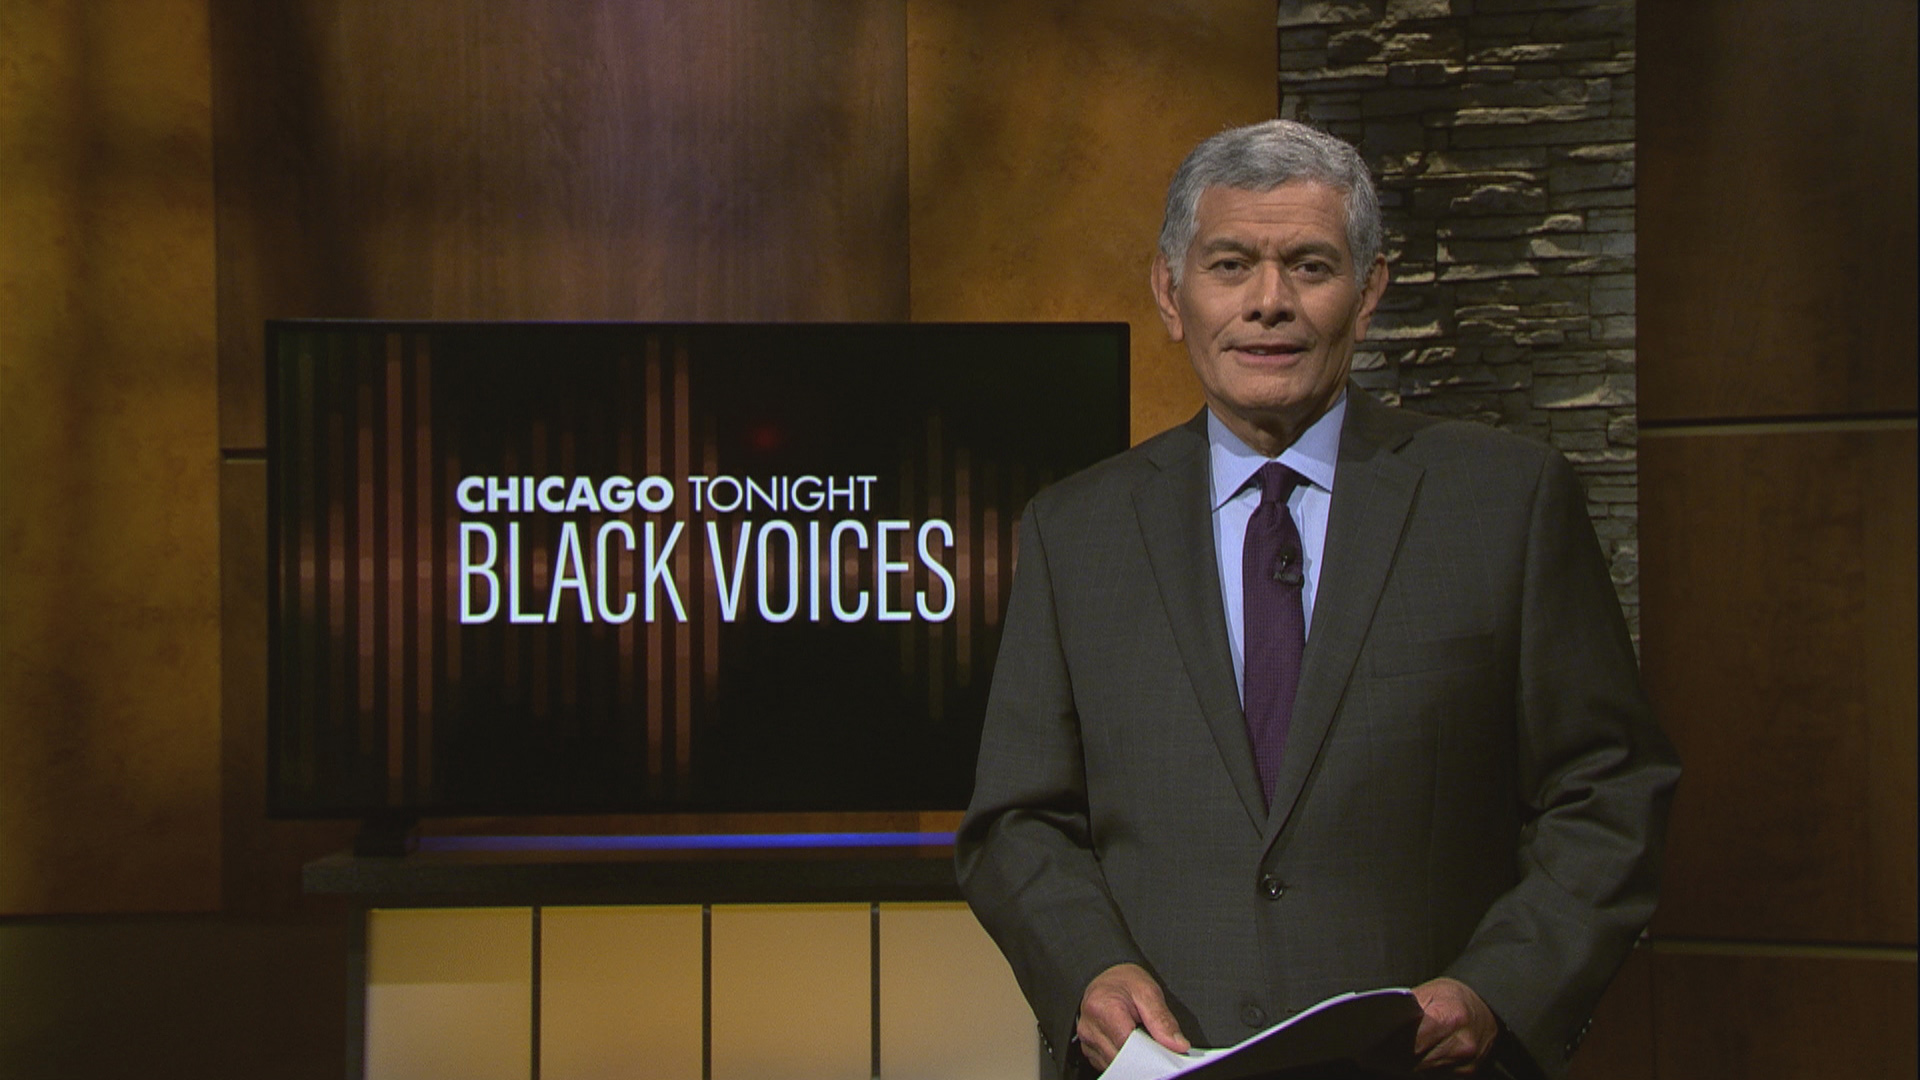 Chicago Tonight: Black Voices, August 1, 2021 - Full Show ...